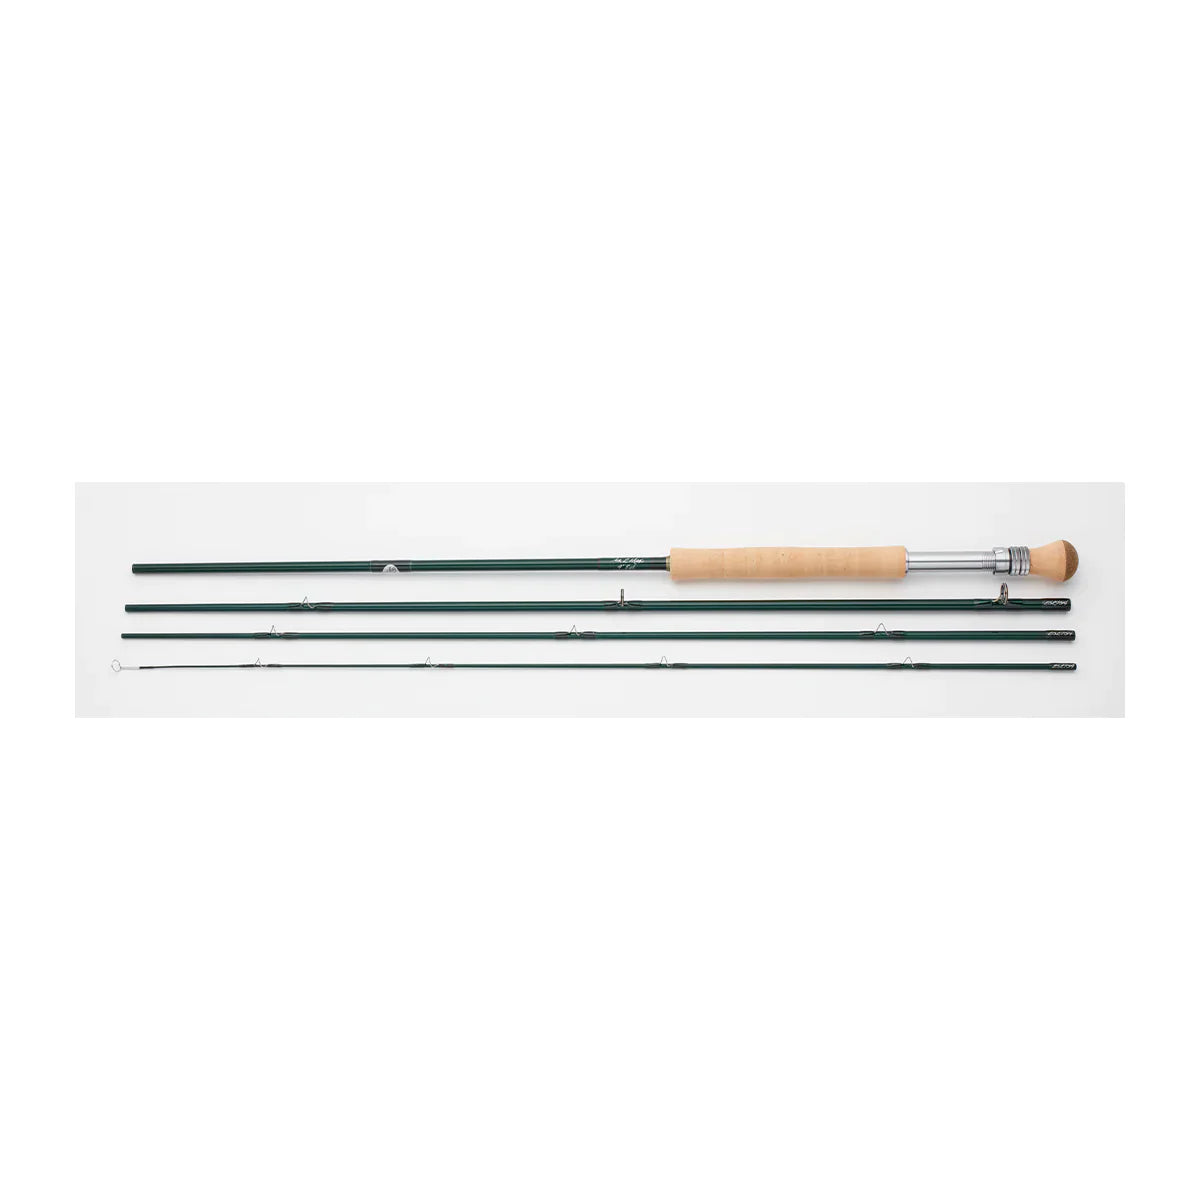 Winston AIR 2 MAX 9wt PERMIT & BONEFISH Fly Rod Combo Outfit - NEW!